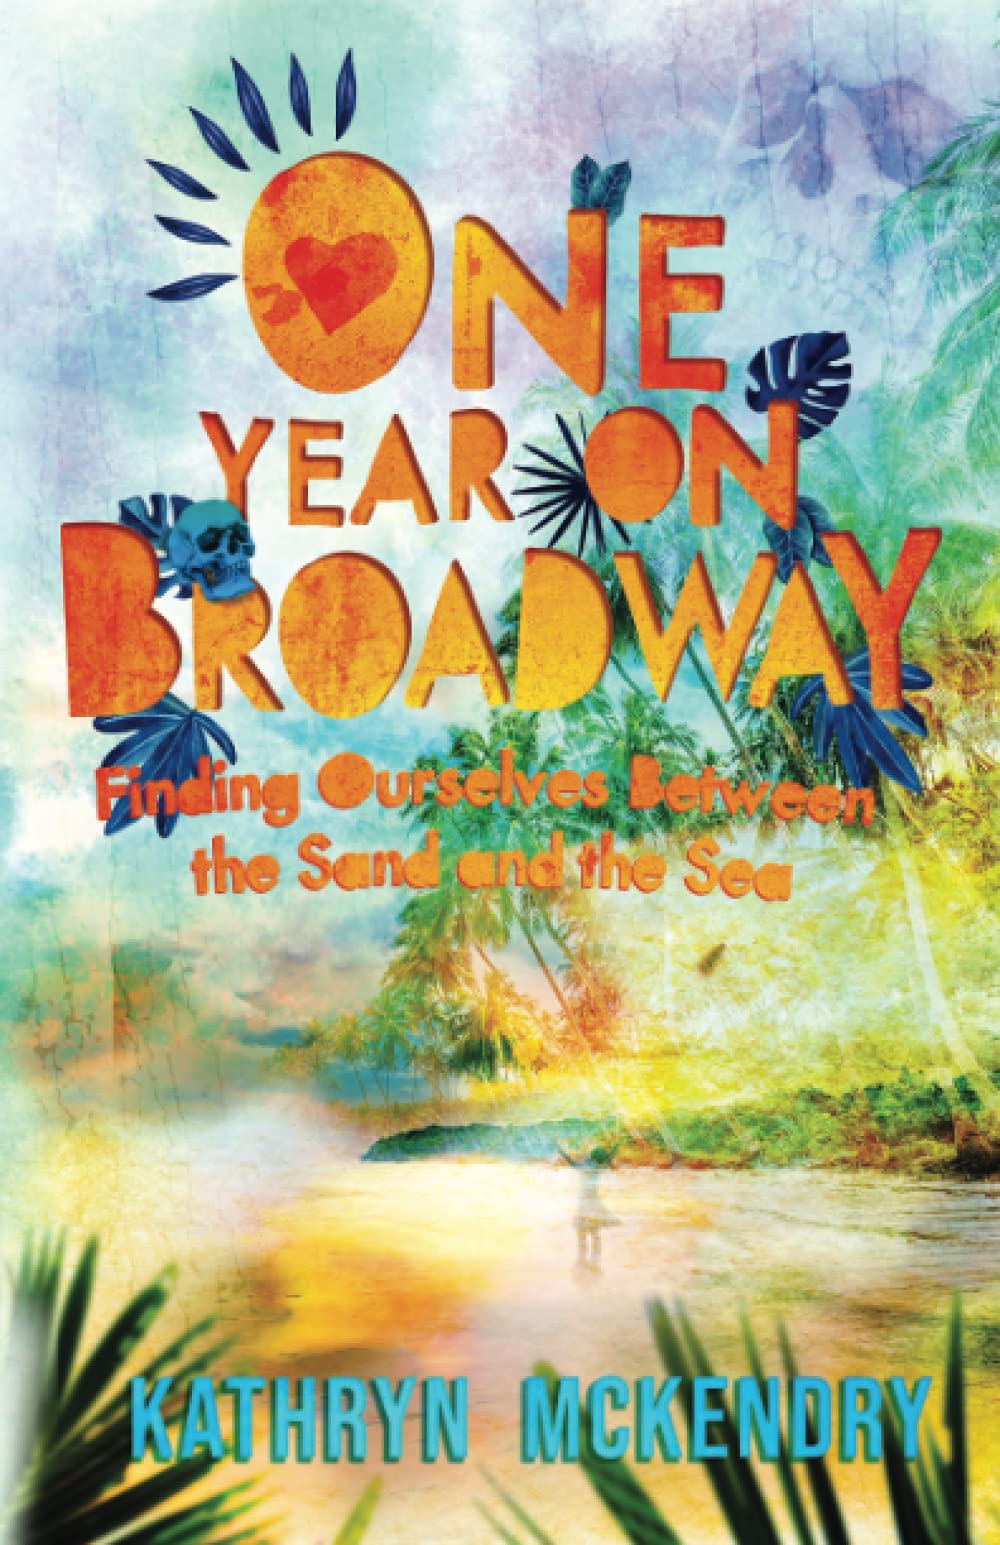 One Year On Broadway: Finding Ourselves Between the Sand and the Sea